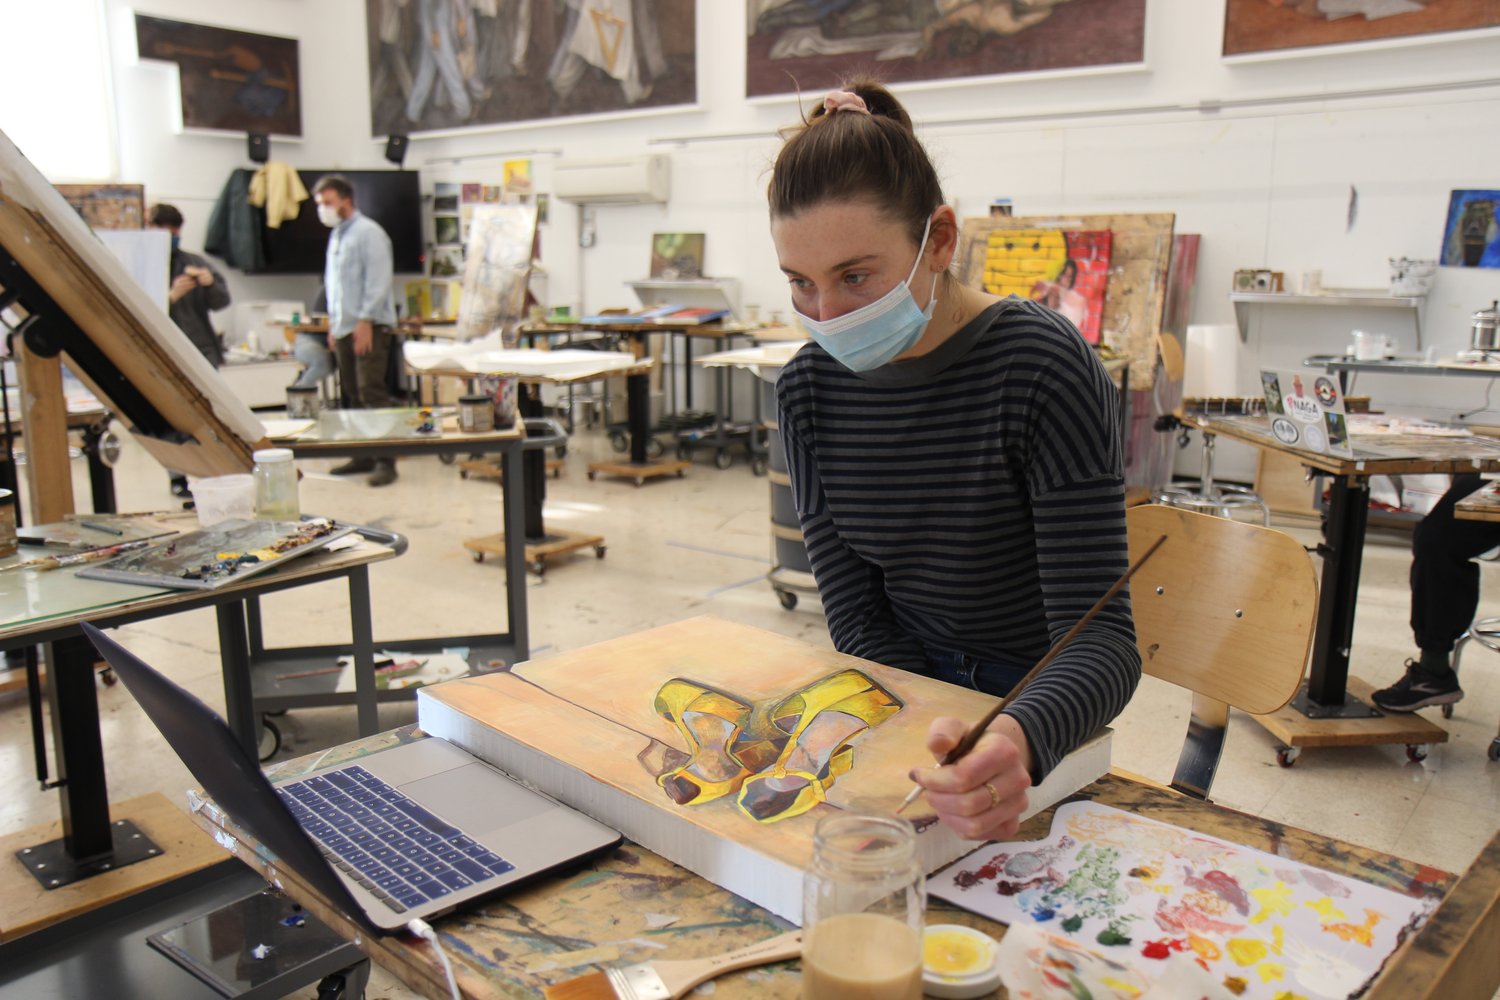 Student painting during Painting III: Studio Materials and Methods.